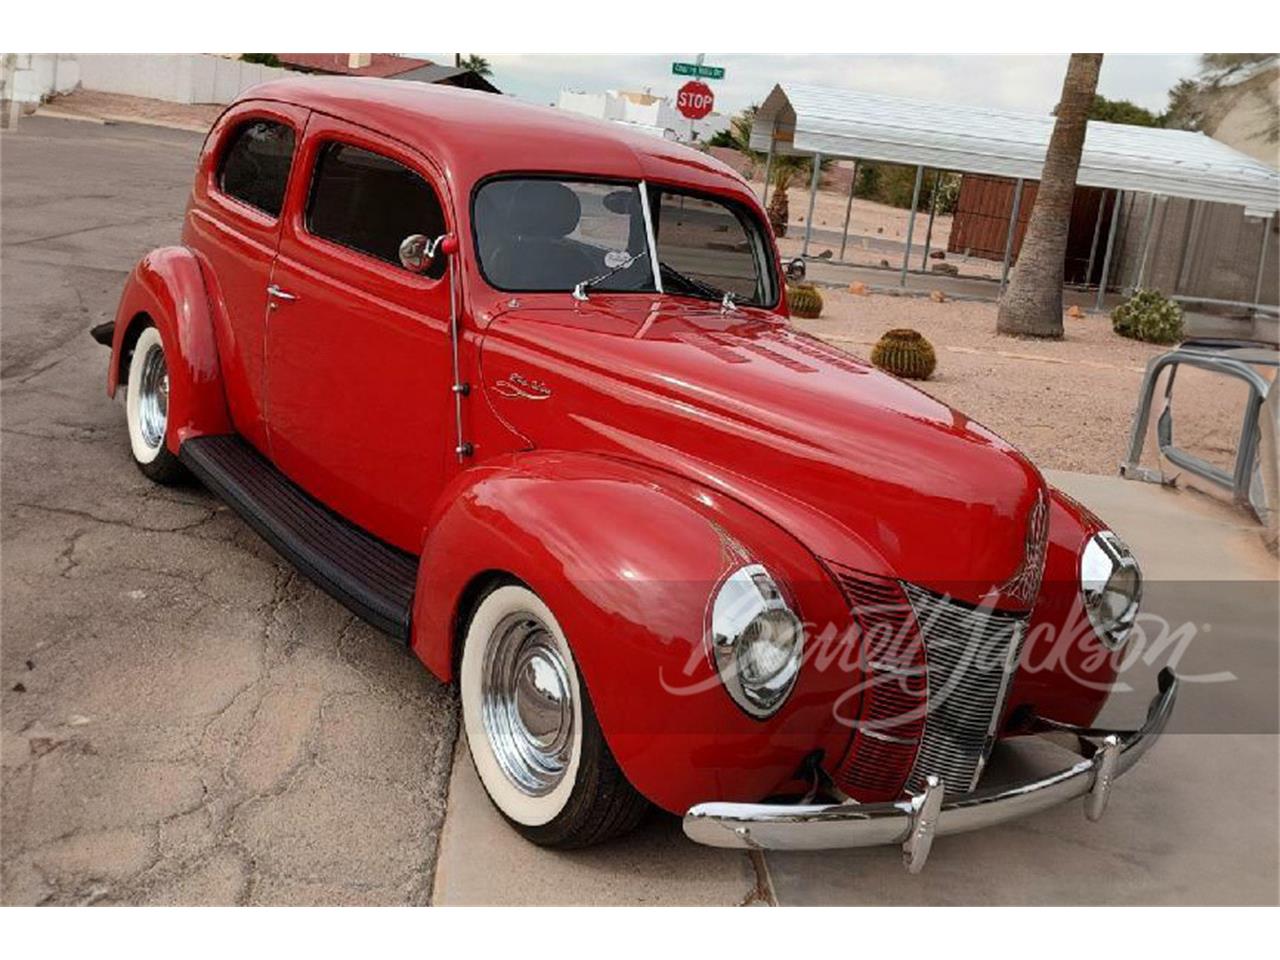 For Sale at Auction: 1940 Ford Deluxe in Scottsdale, Arizona for sale in Scottsdale, AZ